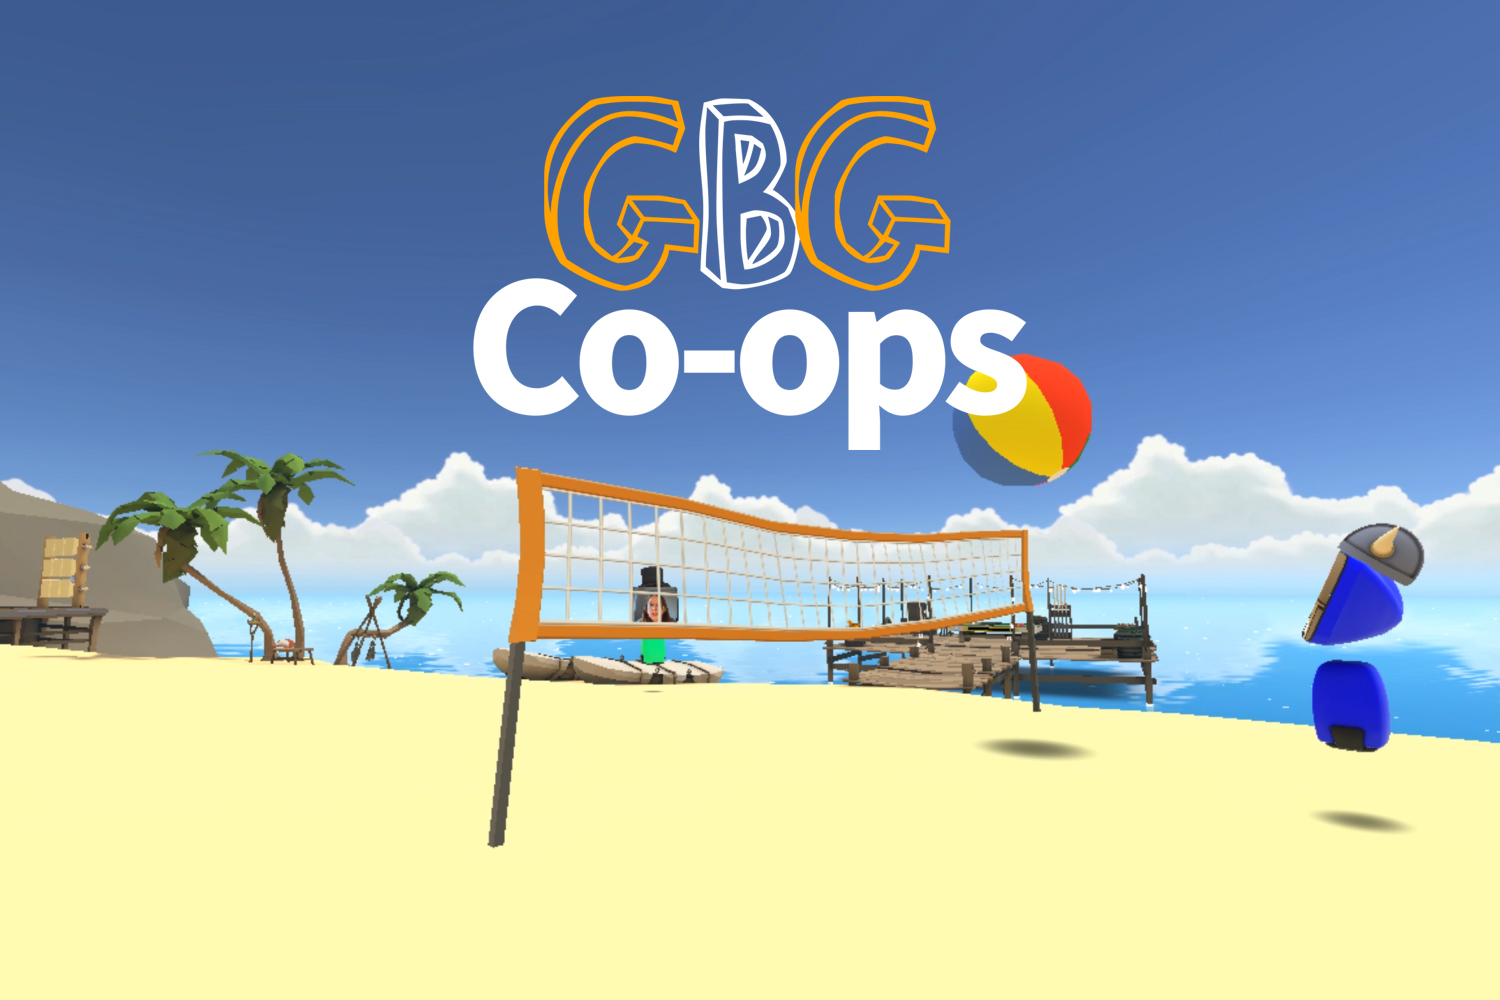 gbg co-ops goes virtual reality